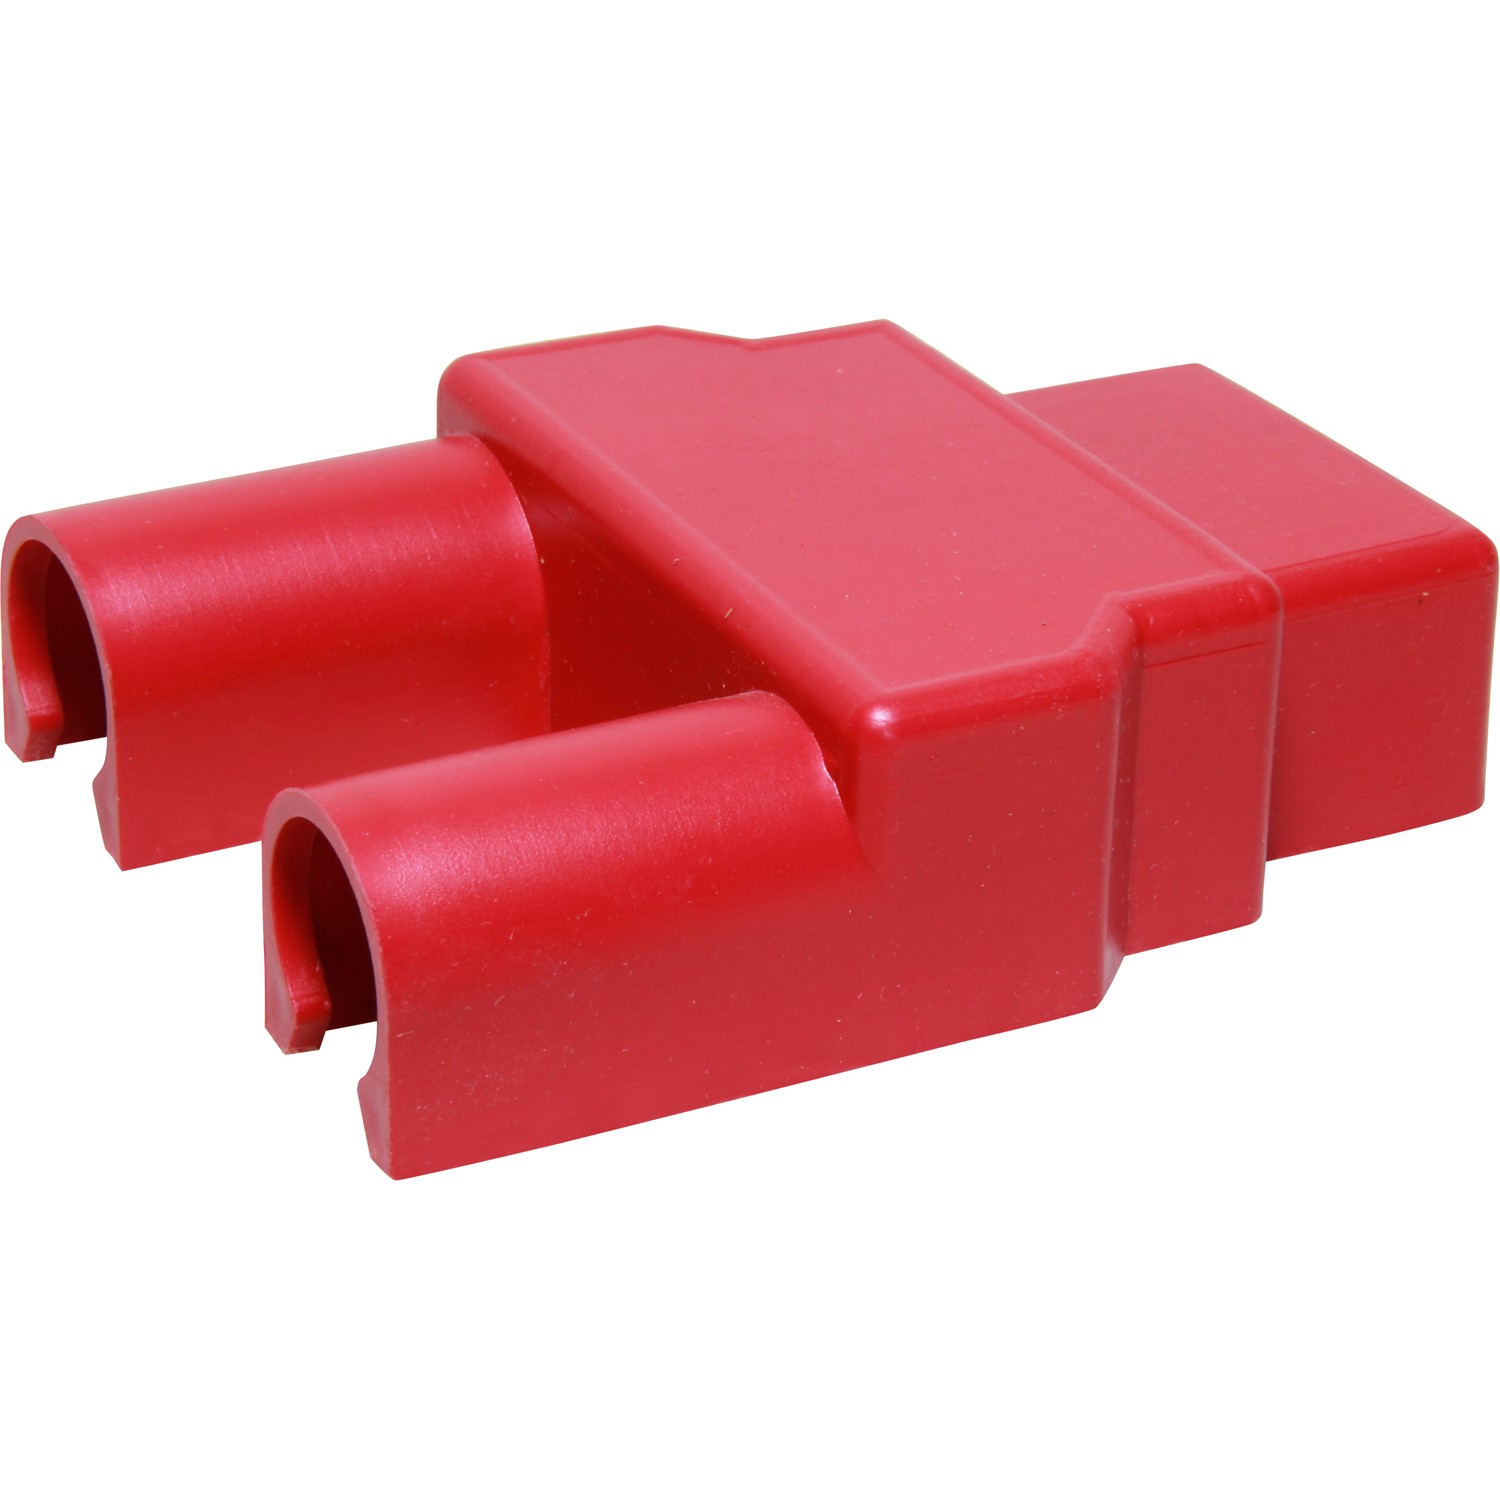 Homyl 1 Set Universal Battery Terminal PVC Insulating Protector Covers Black+Red 